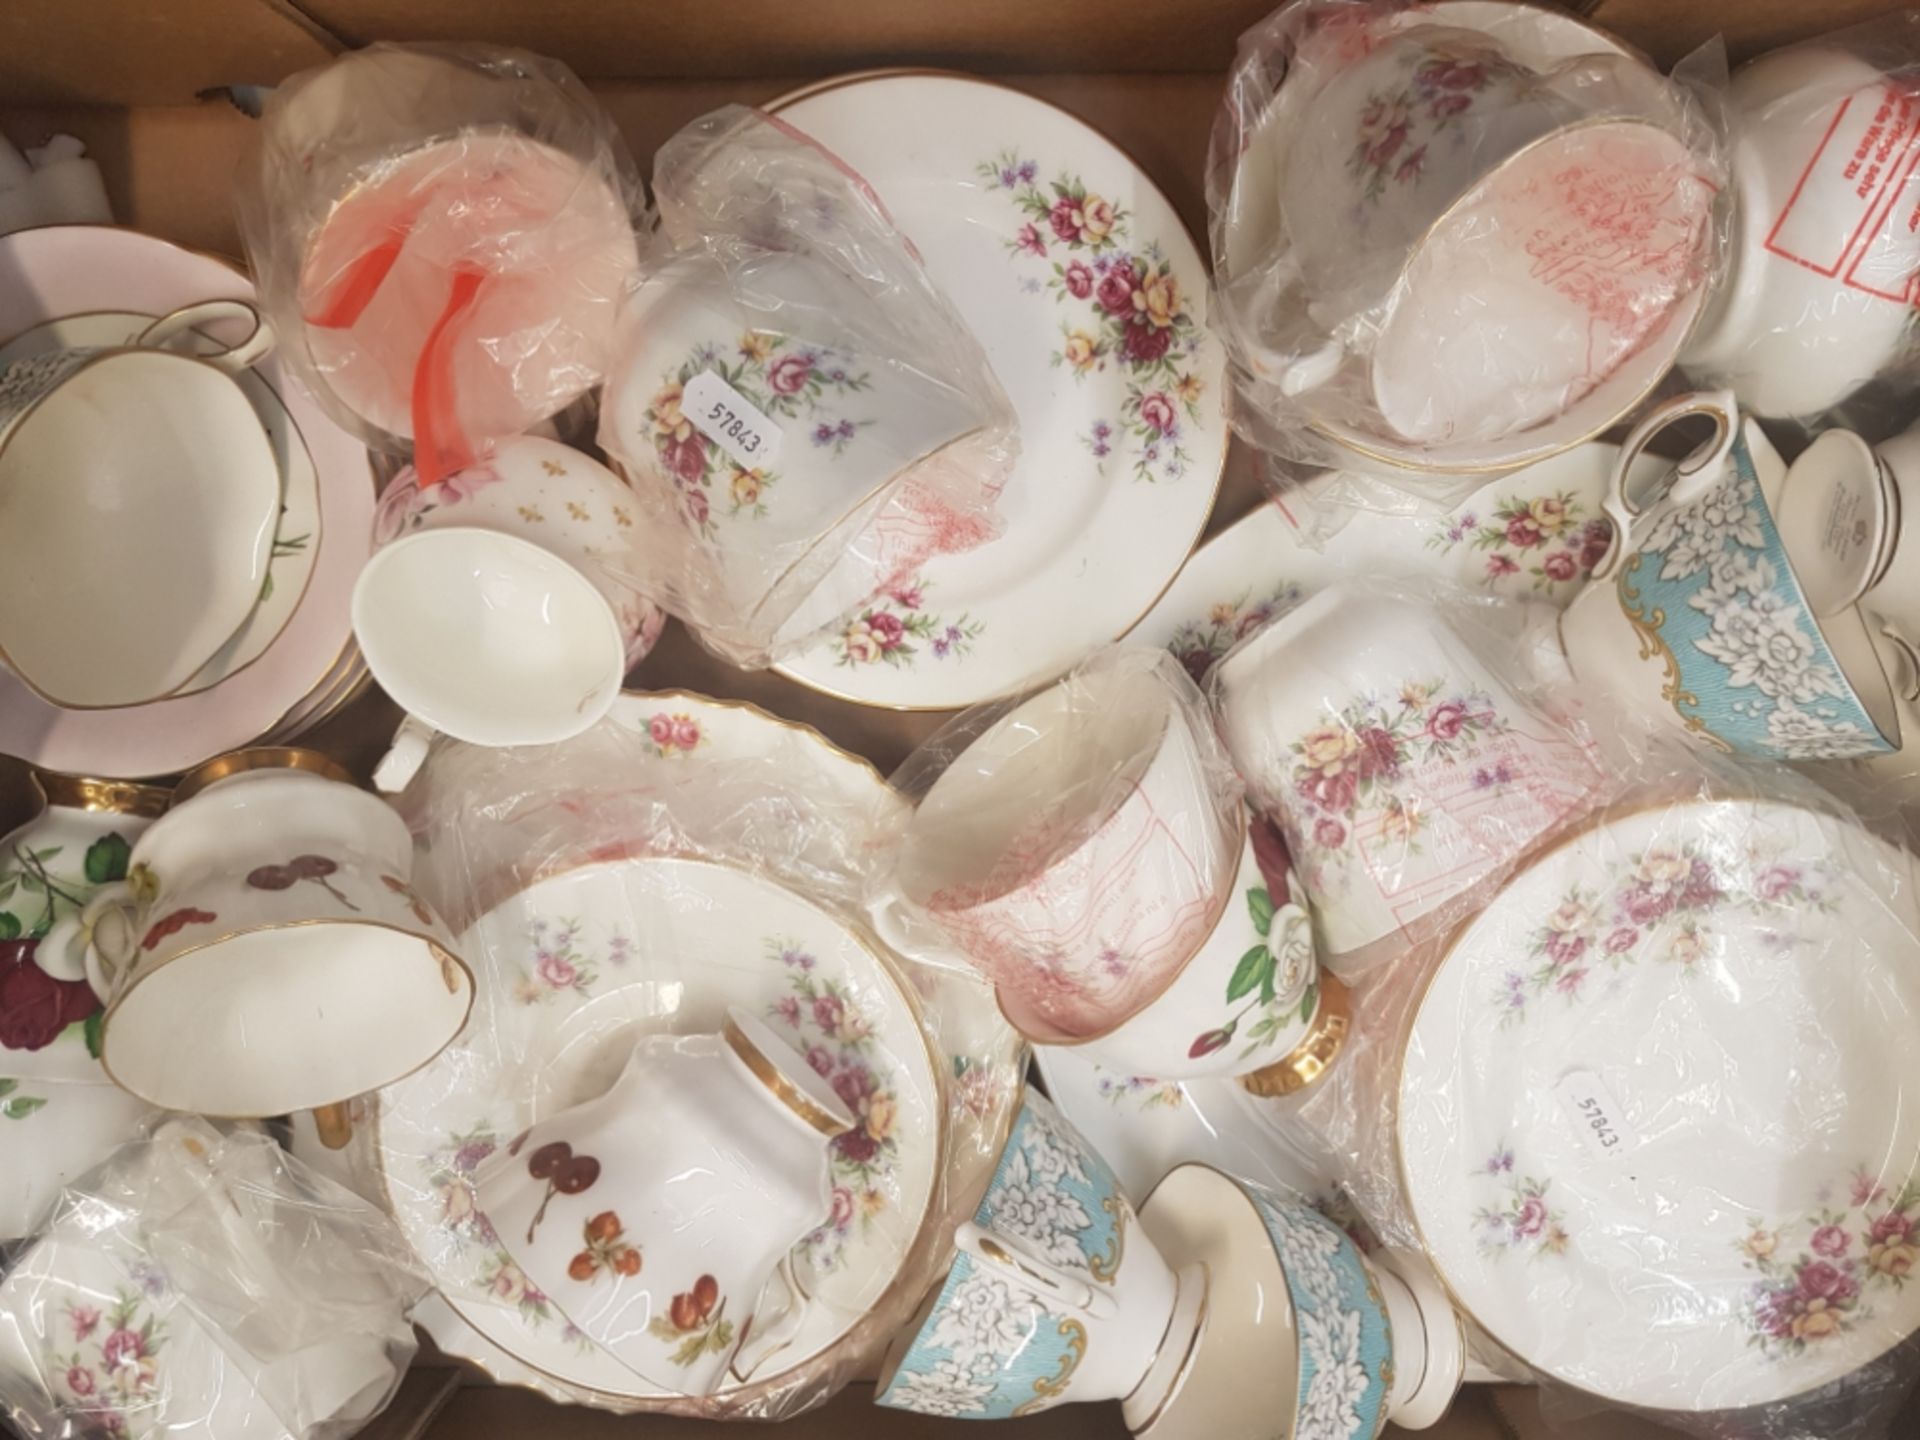 Queen Anne floral tea ware together with Royal Albert enchantment pattern tea cups etc (1 tray).